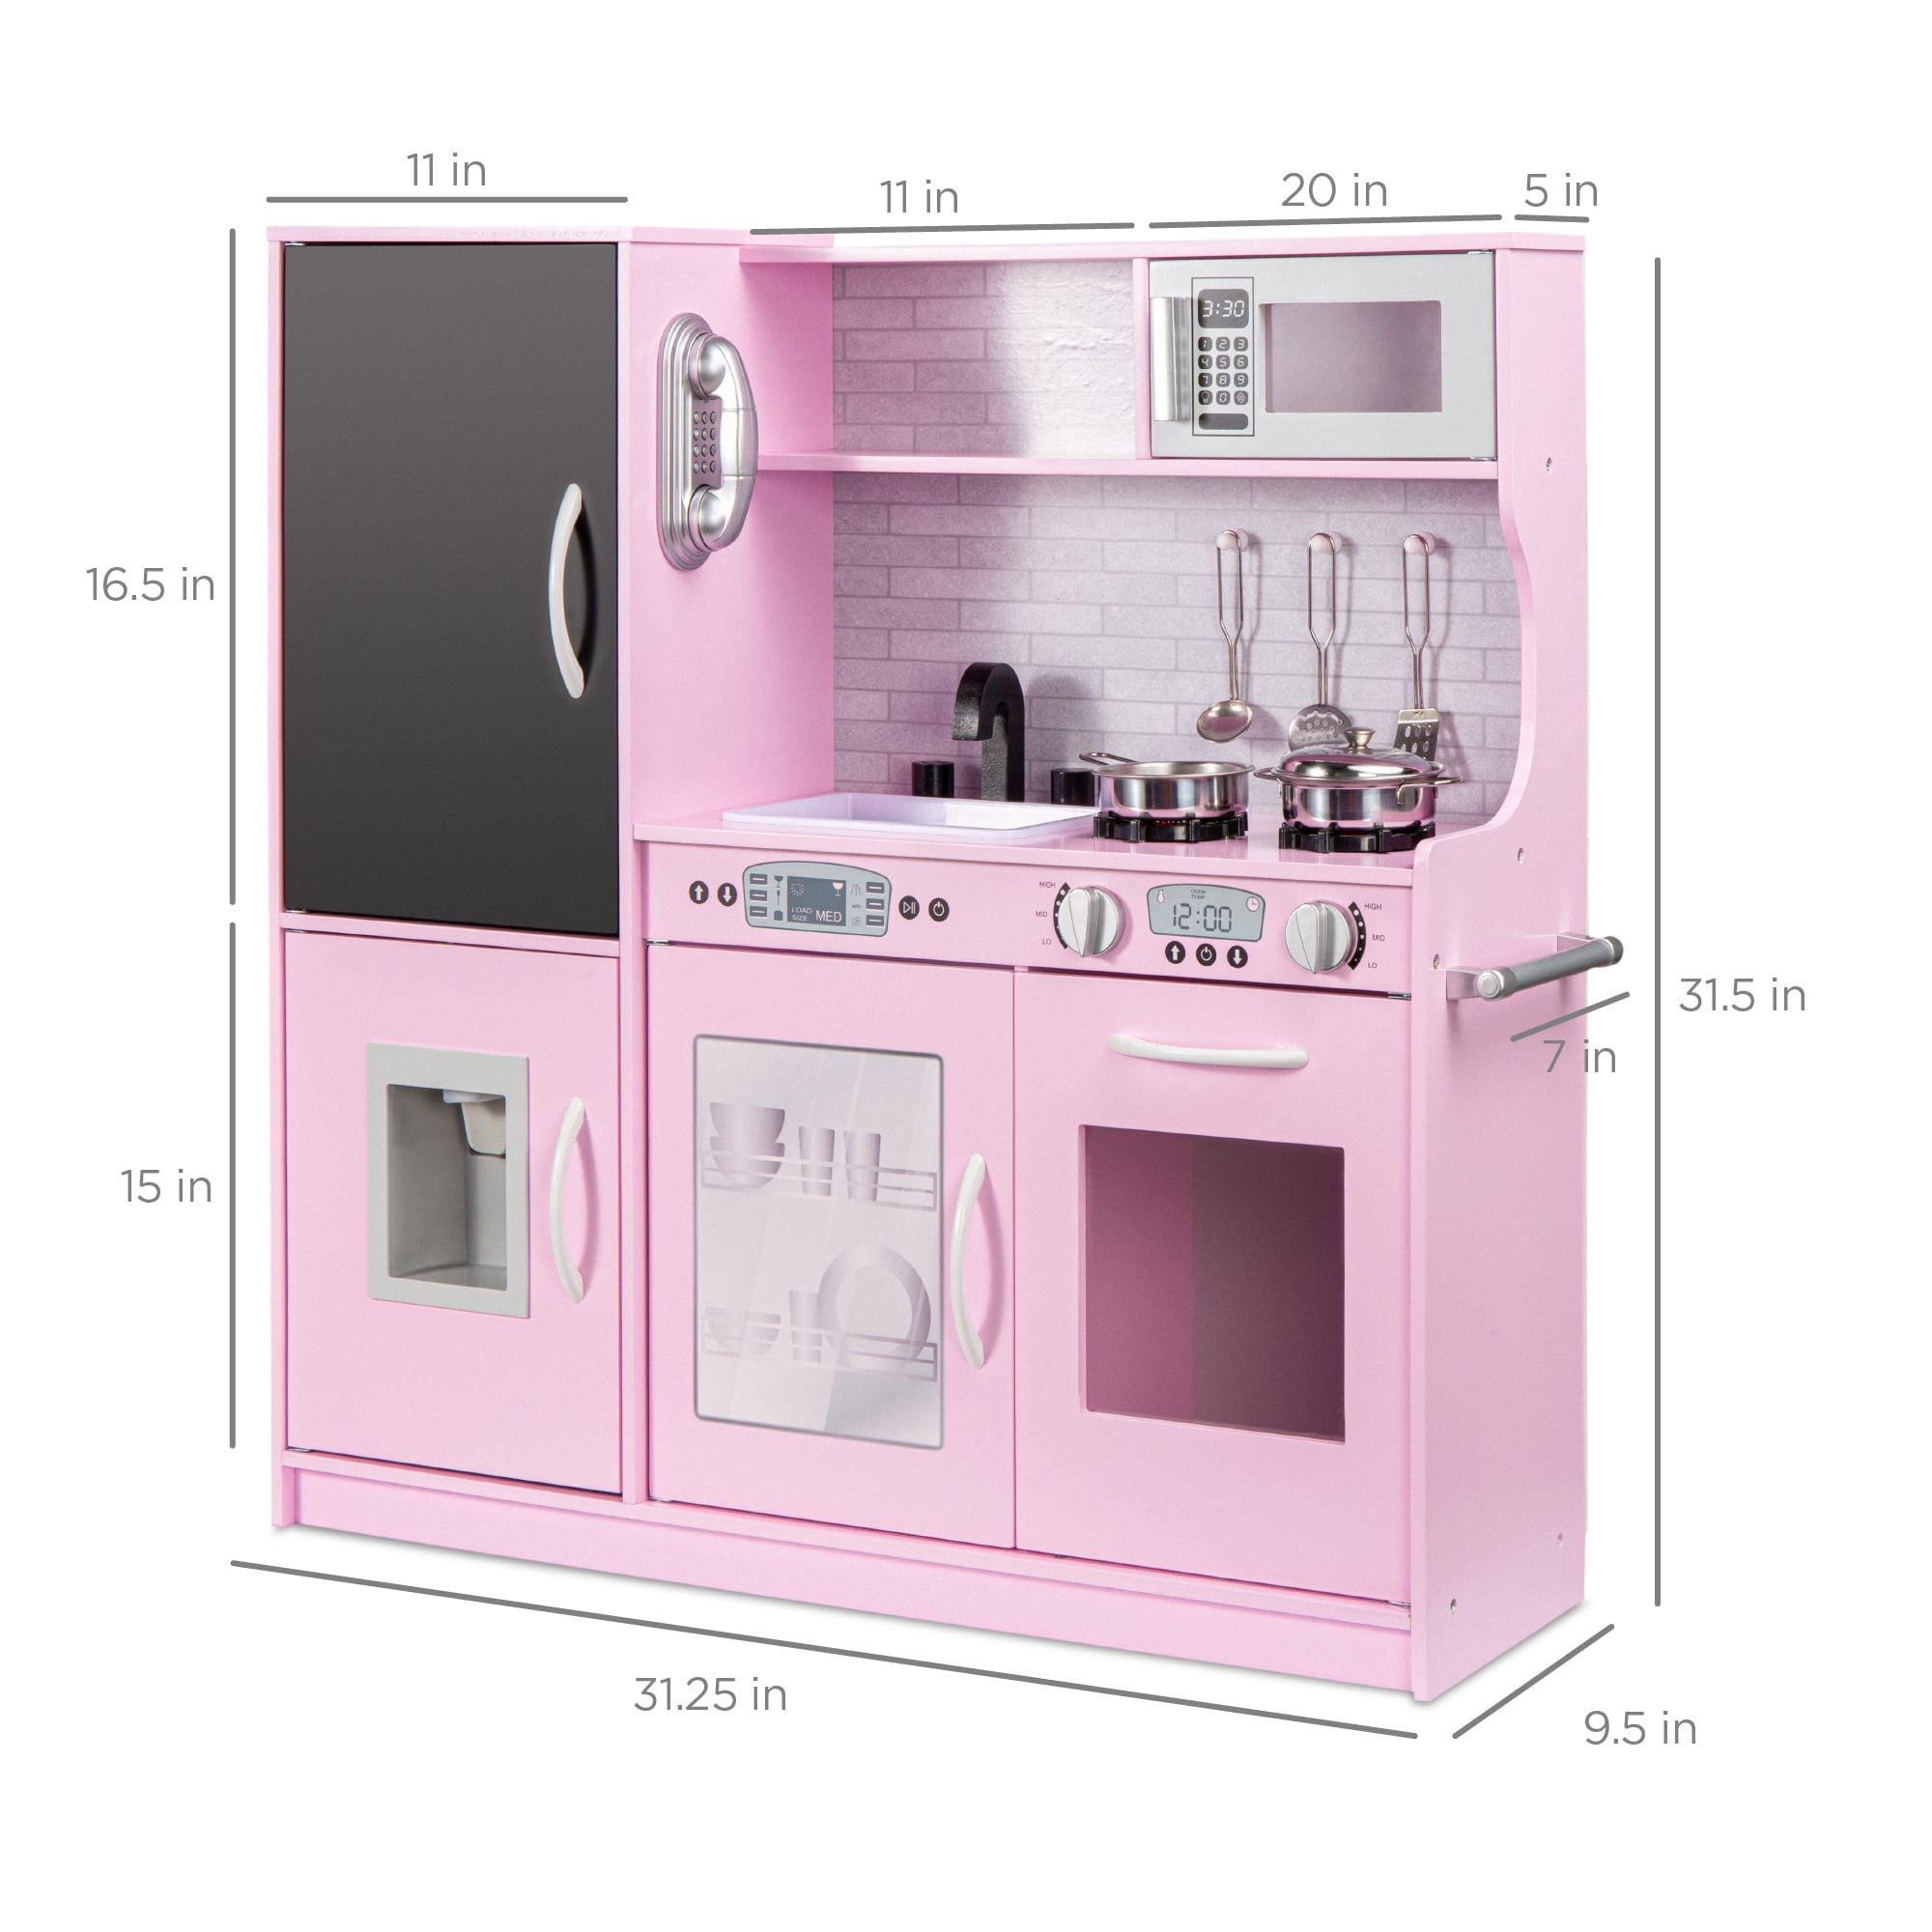 and Sink Sounds Realistic Design Utensils Fridge Marble Backdrop Shelves Best Choice Products Wood Pretend Play Kitchen Toy Set for Kids w/ Chalkboard Oven Microwave Telephone Pink 